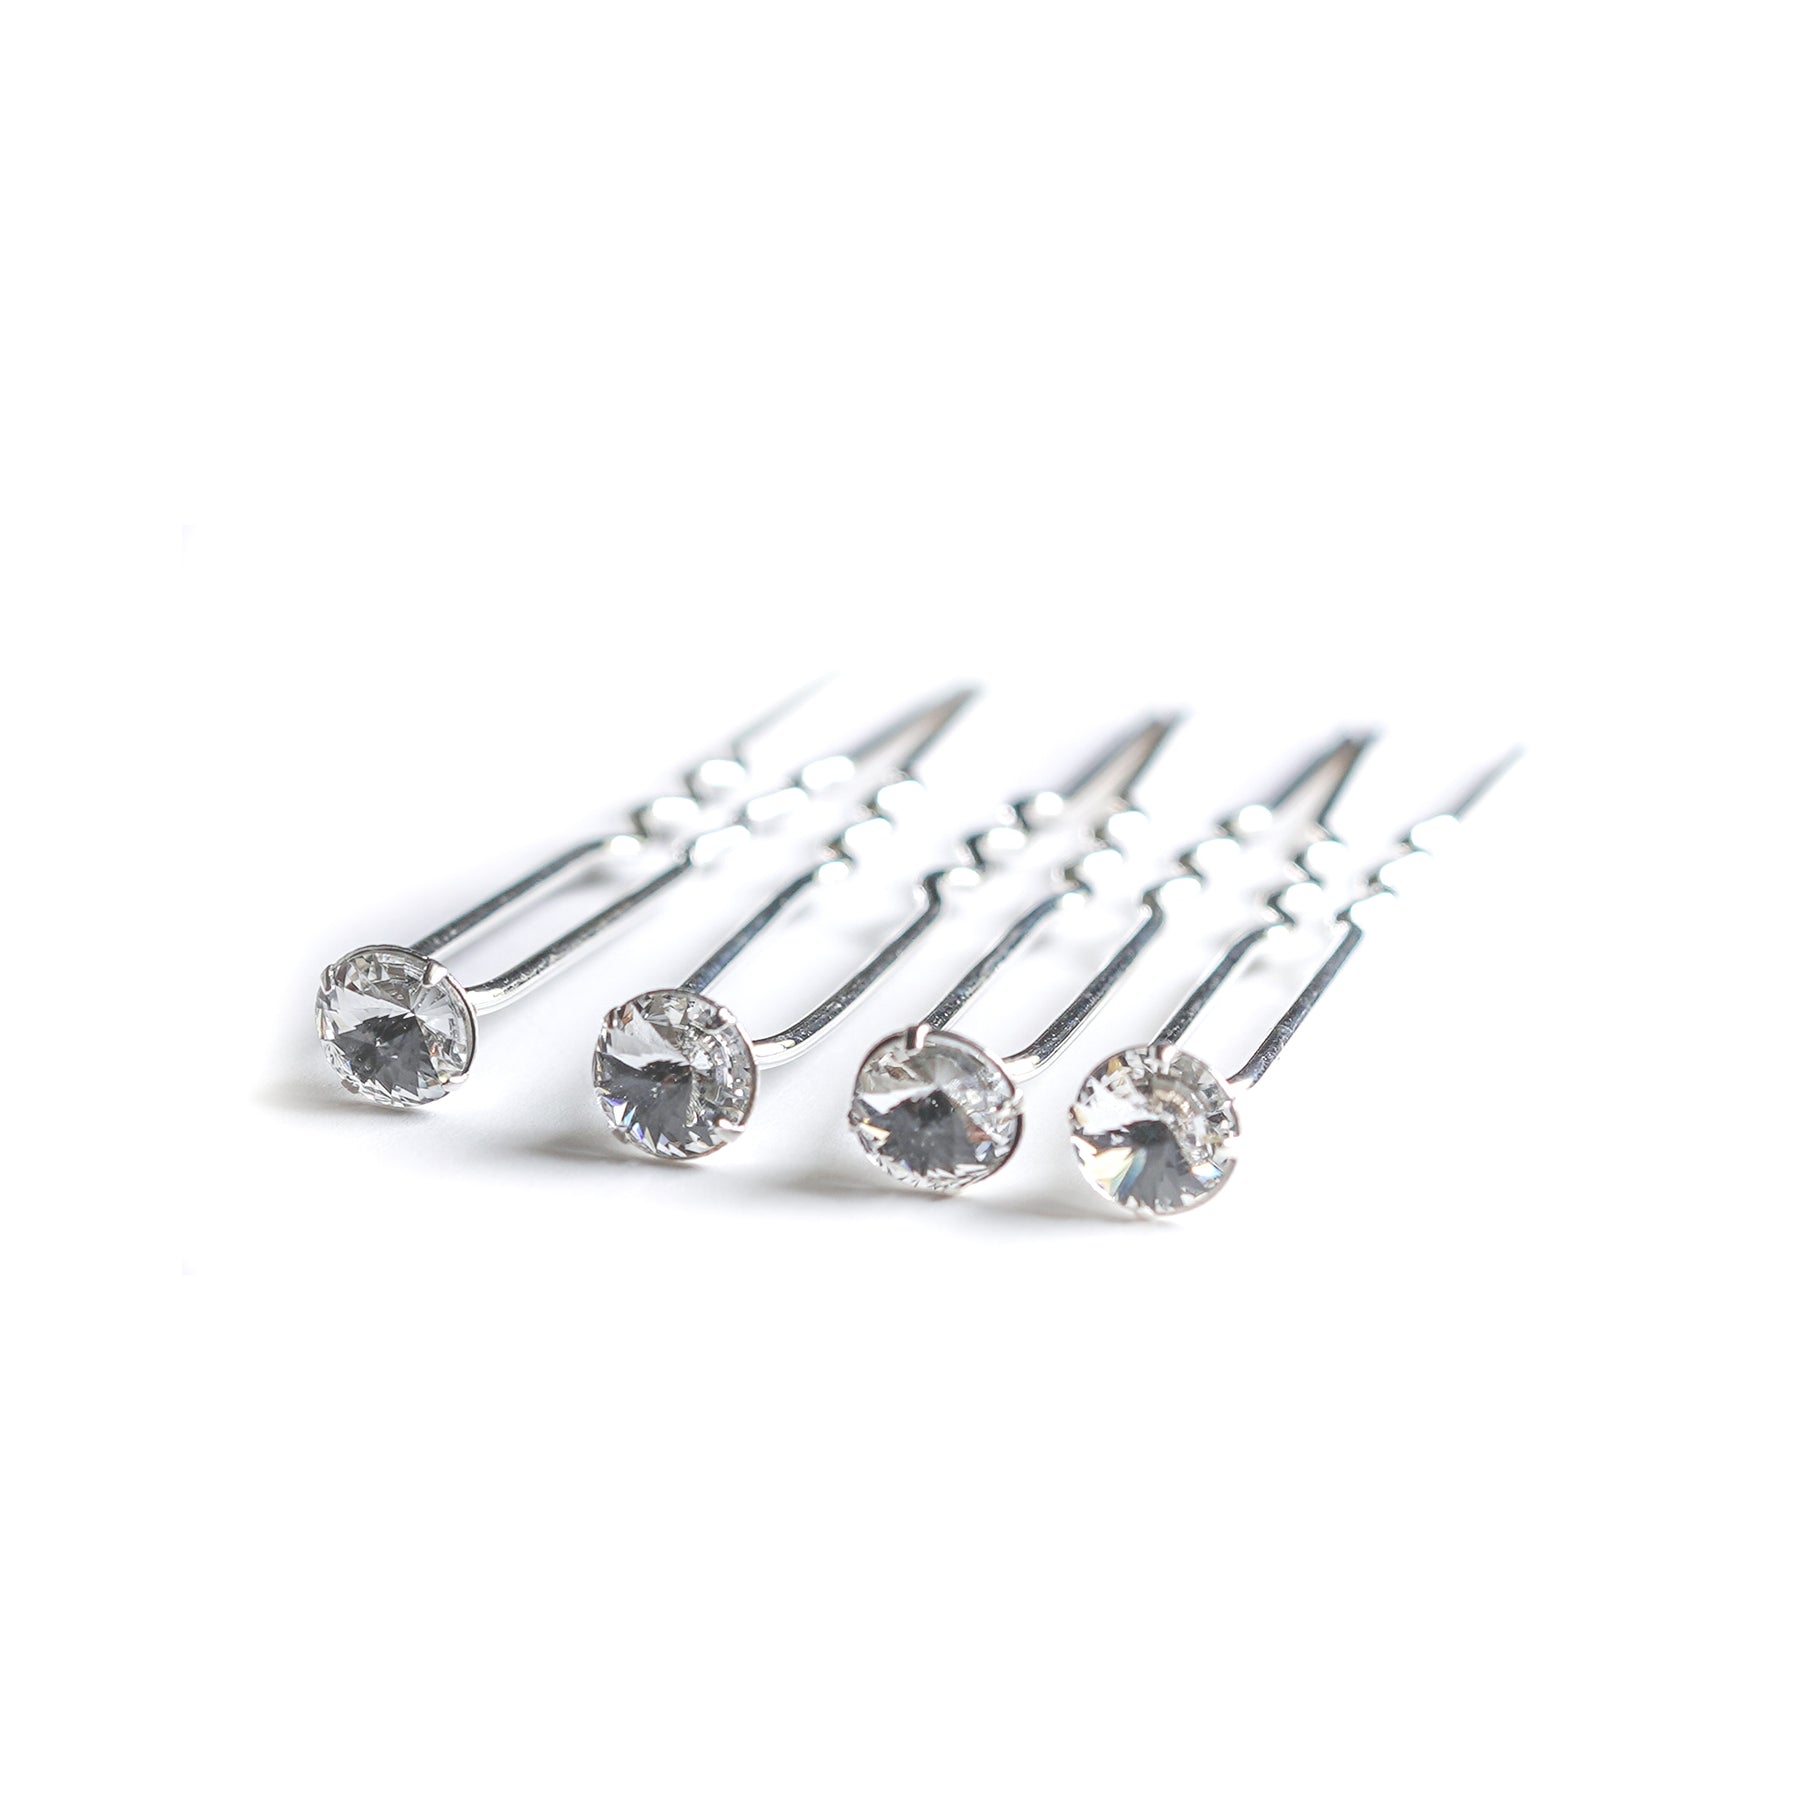 8mm Solitaire Stick Hair Pins 4-pack